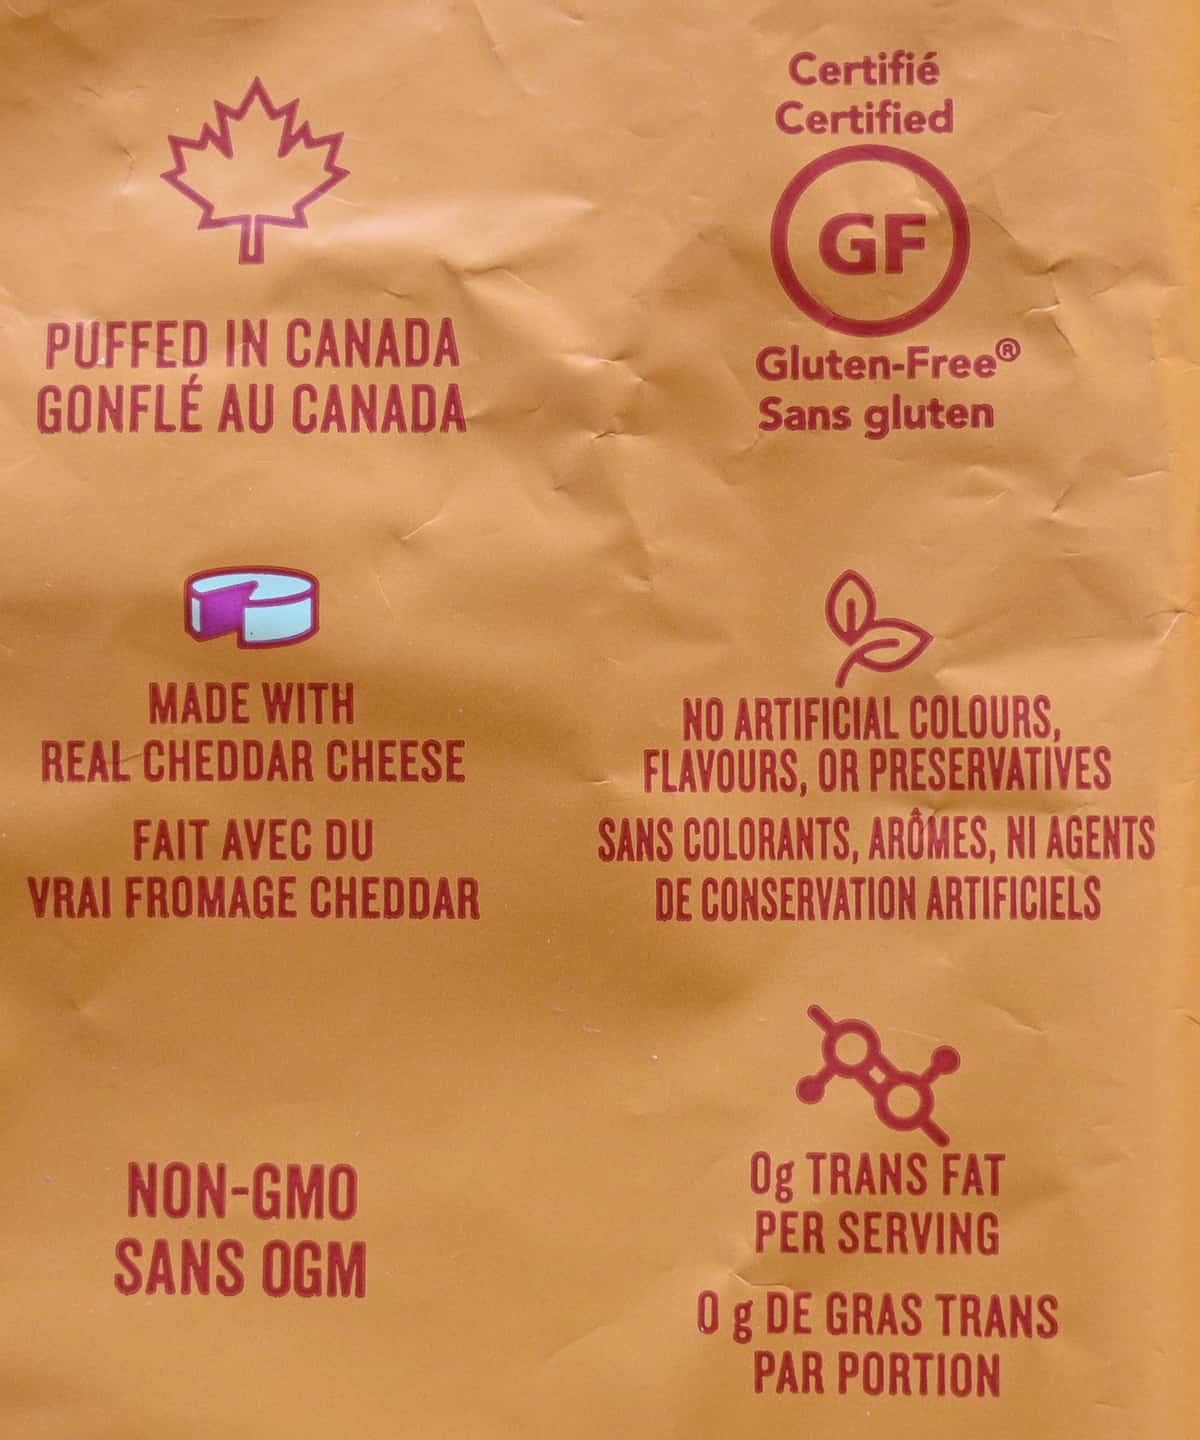 Image of the back of the bag of puffs stating that they are gluten-free and made with real cheddar cheese.